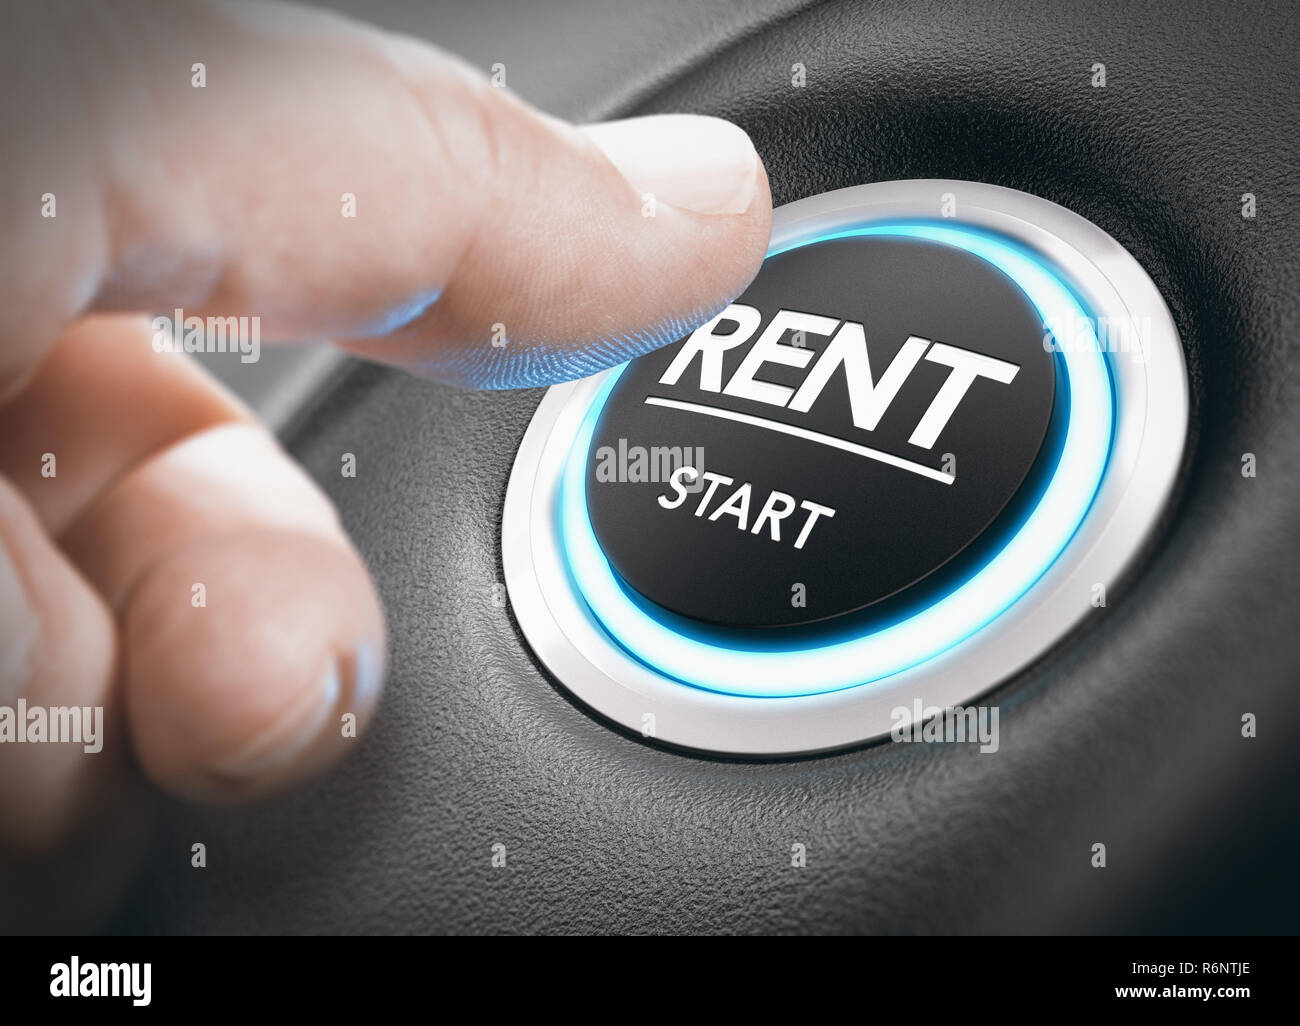 Car or Motorhome Rental Concept, Rent a Vehicle. Stock Photo